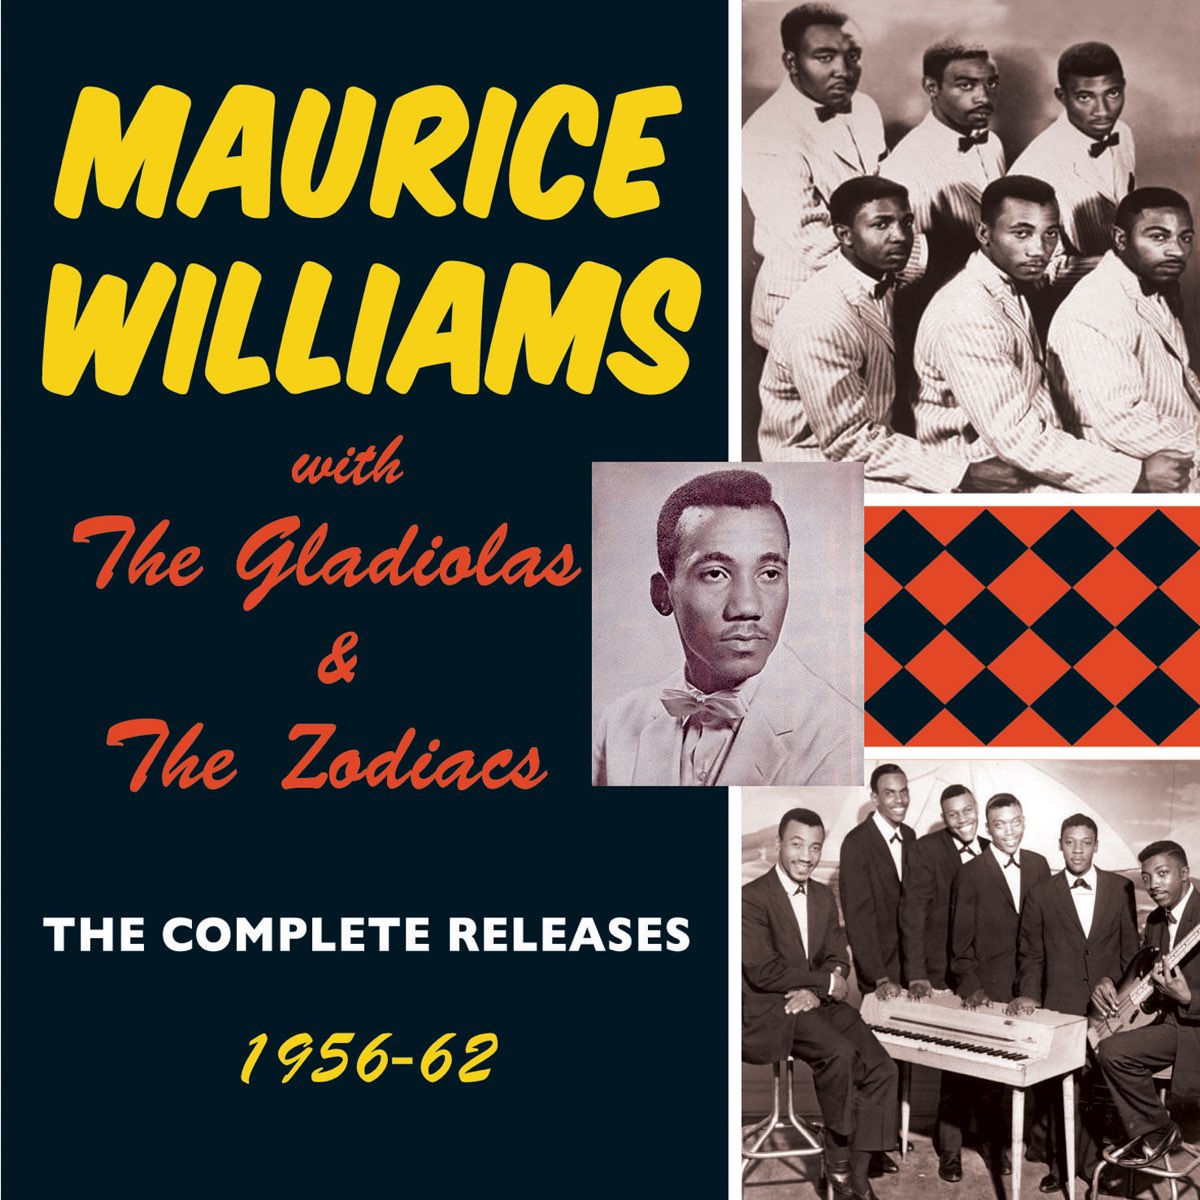 Maurice Williams & The Zodiacs & The Gladiolasの「Maurice Williams with The Gladiolas and The Zodiacs: The Complete Releases 1956-62」をApple Musicで